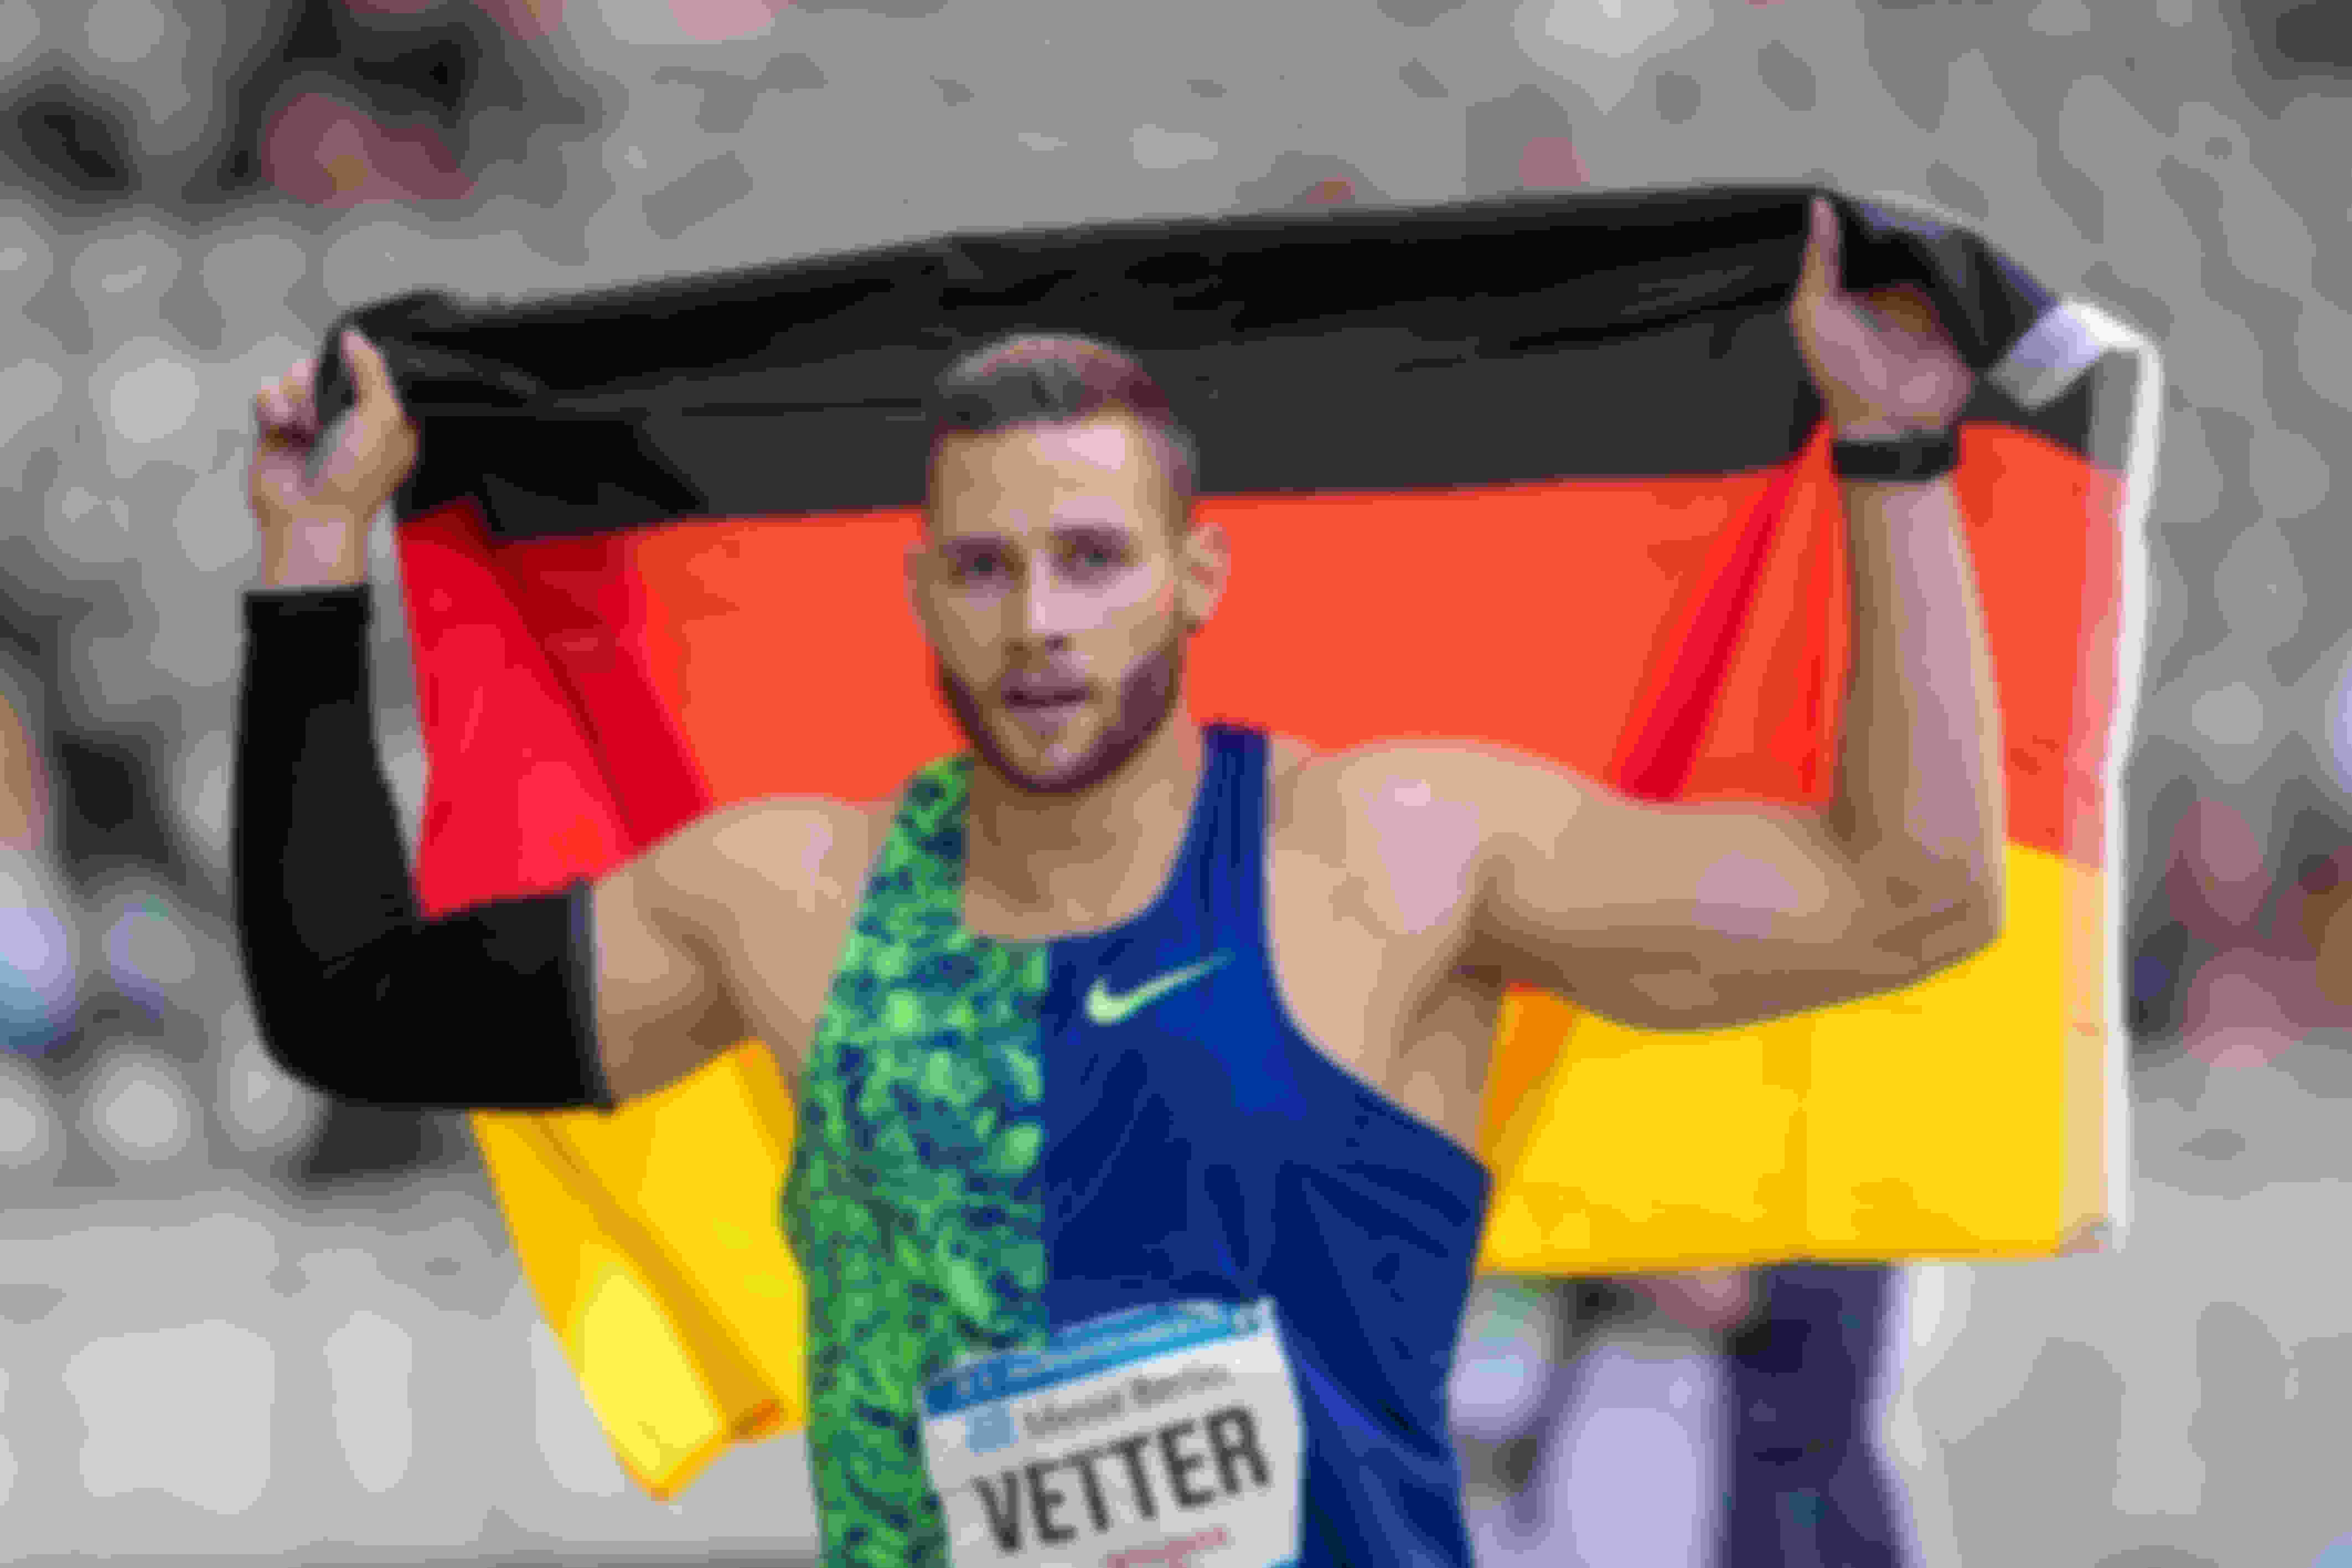 Johannes Vetter celebrates his javelin victory at the ISTAF meeting in Berlin